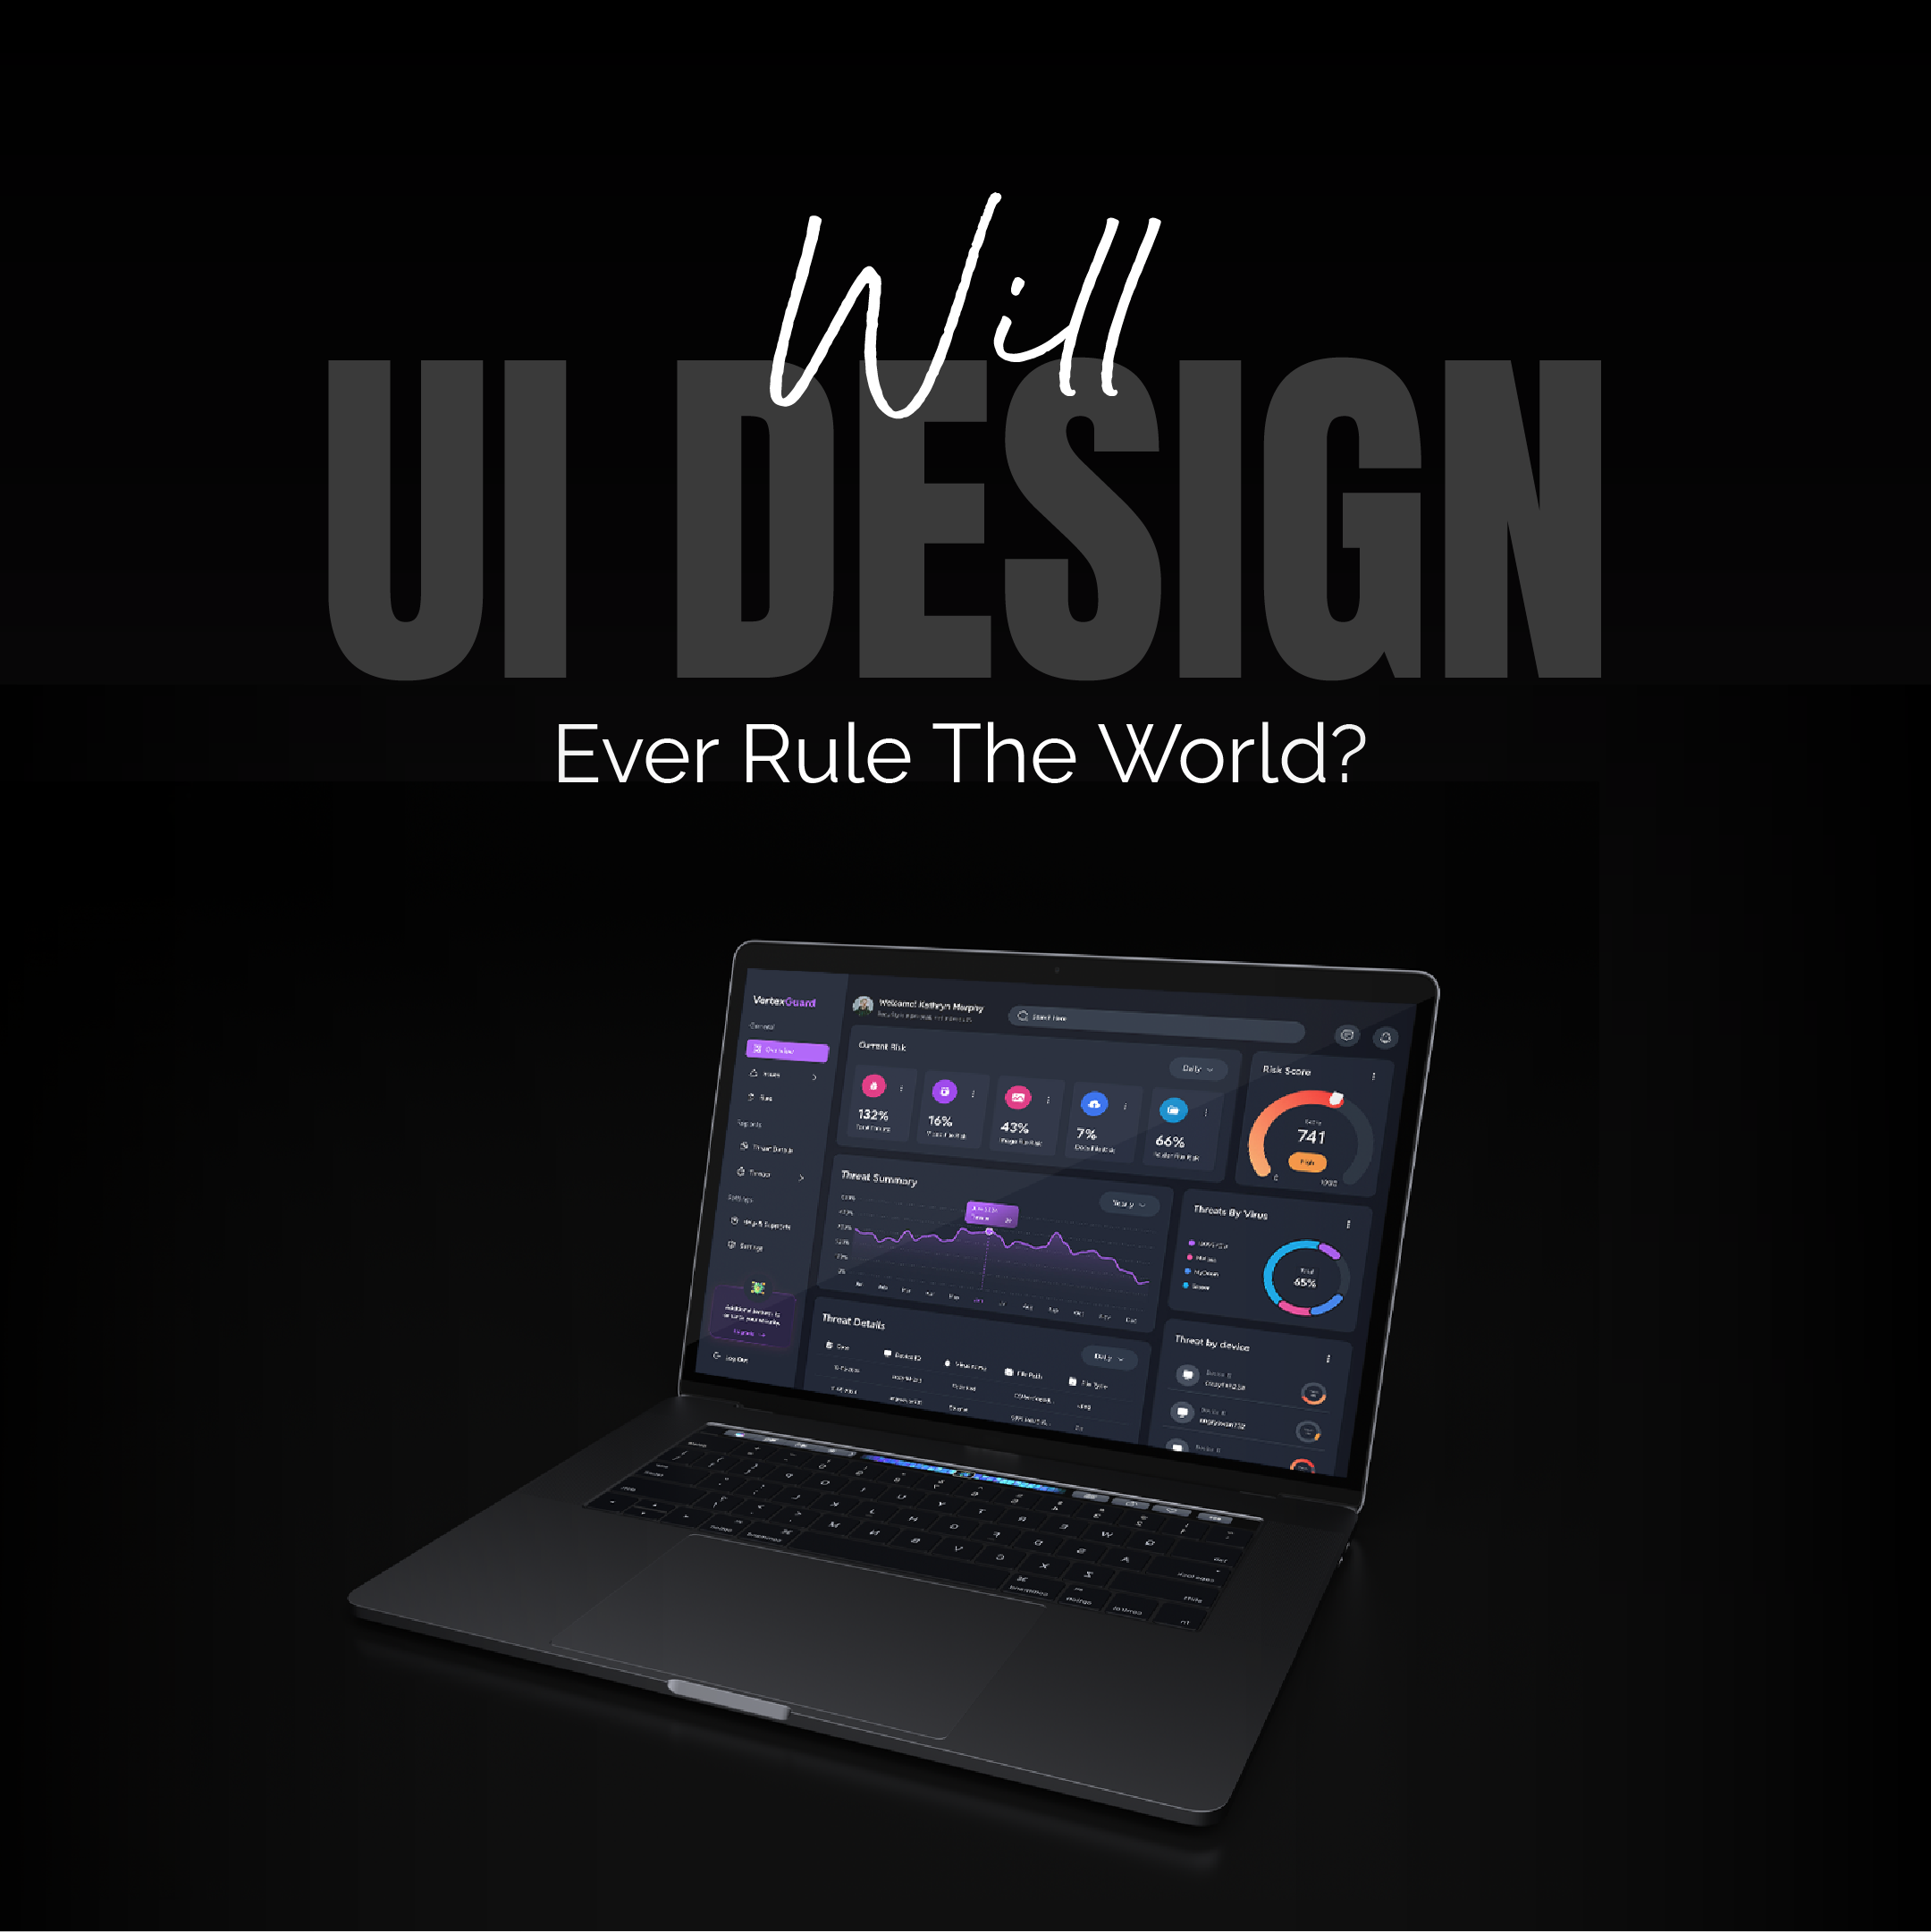 Will UI Design Ever Rule The World?